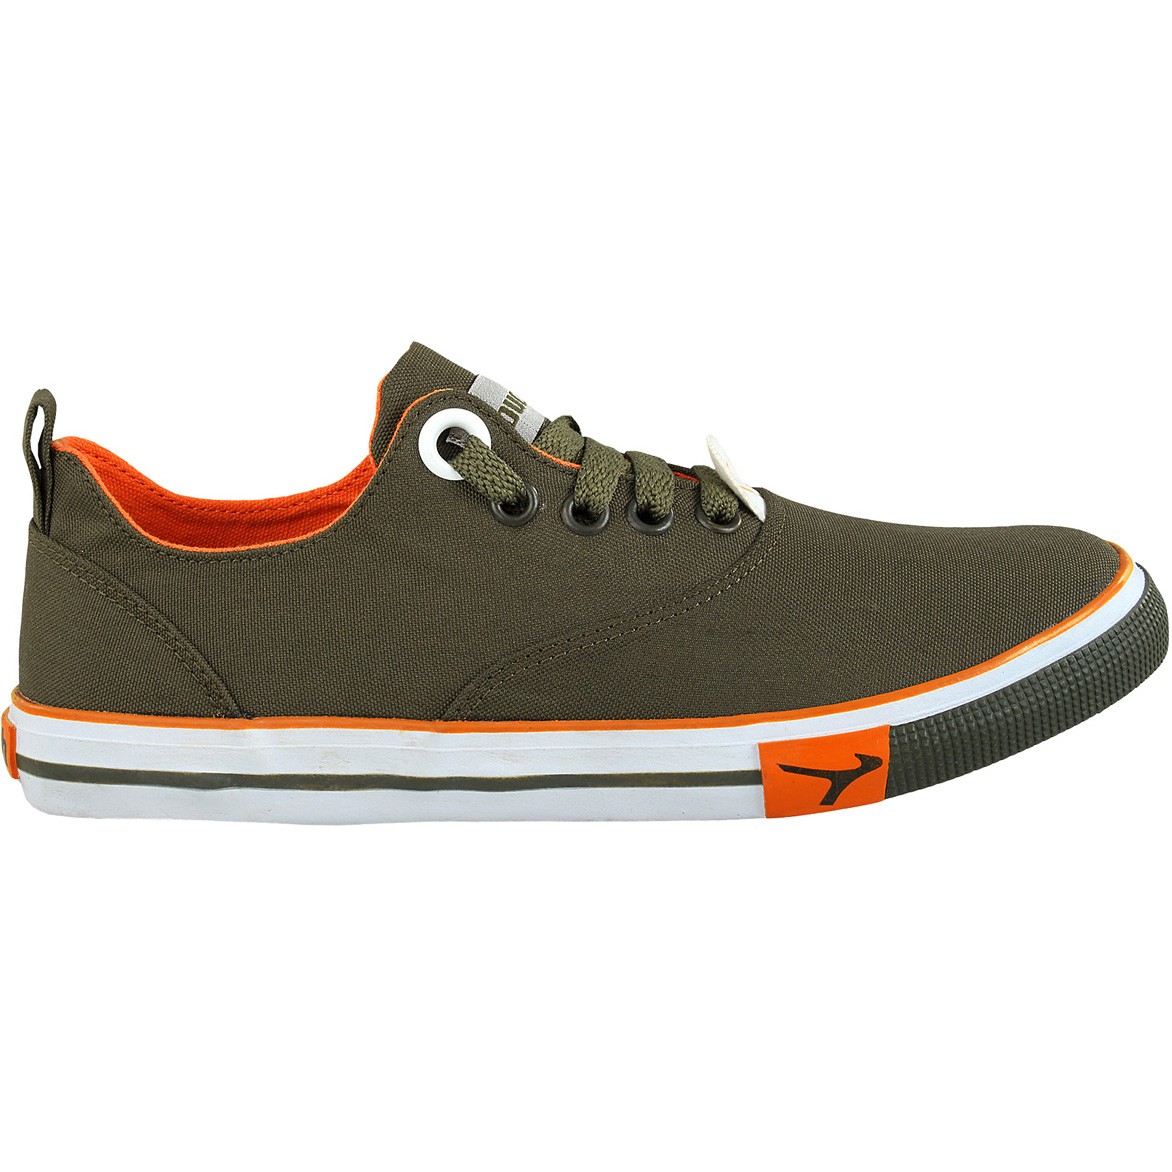 Buy Boys Canvas Shoes, Sneakers for Men 